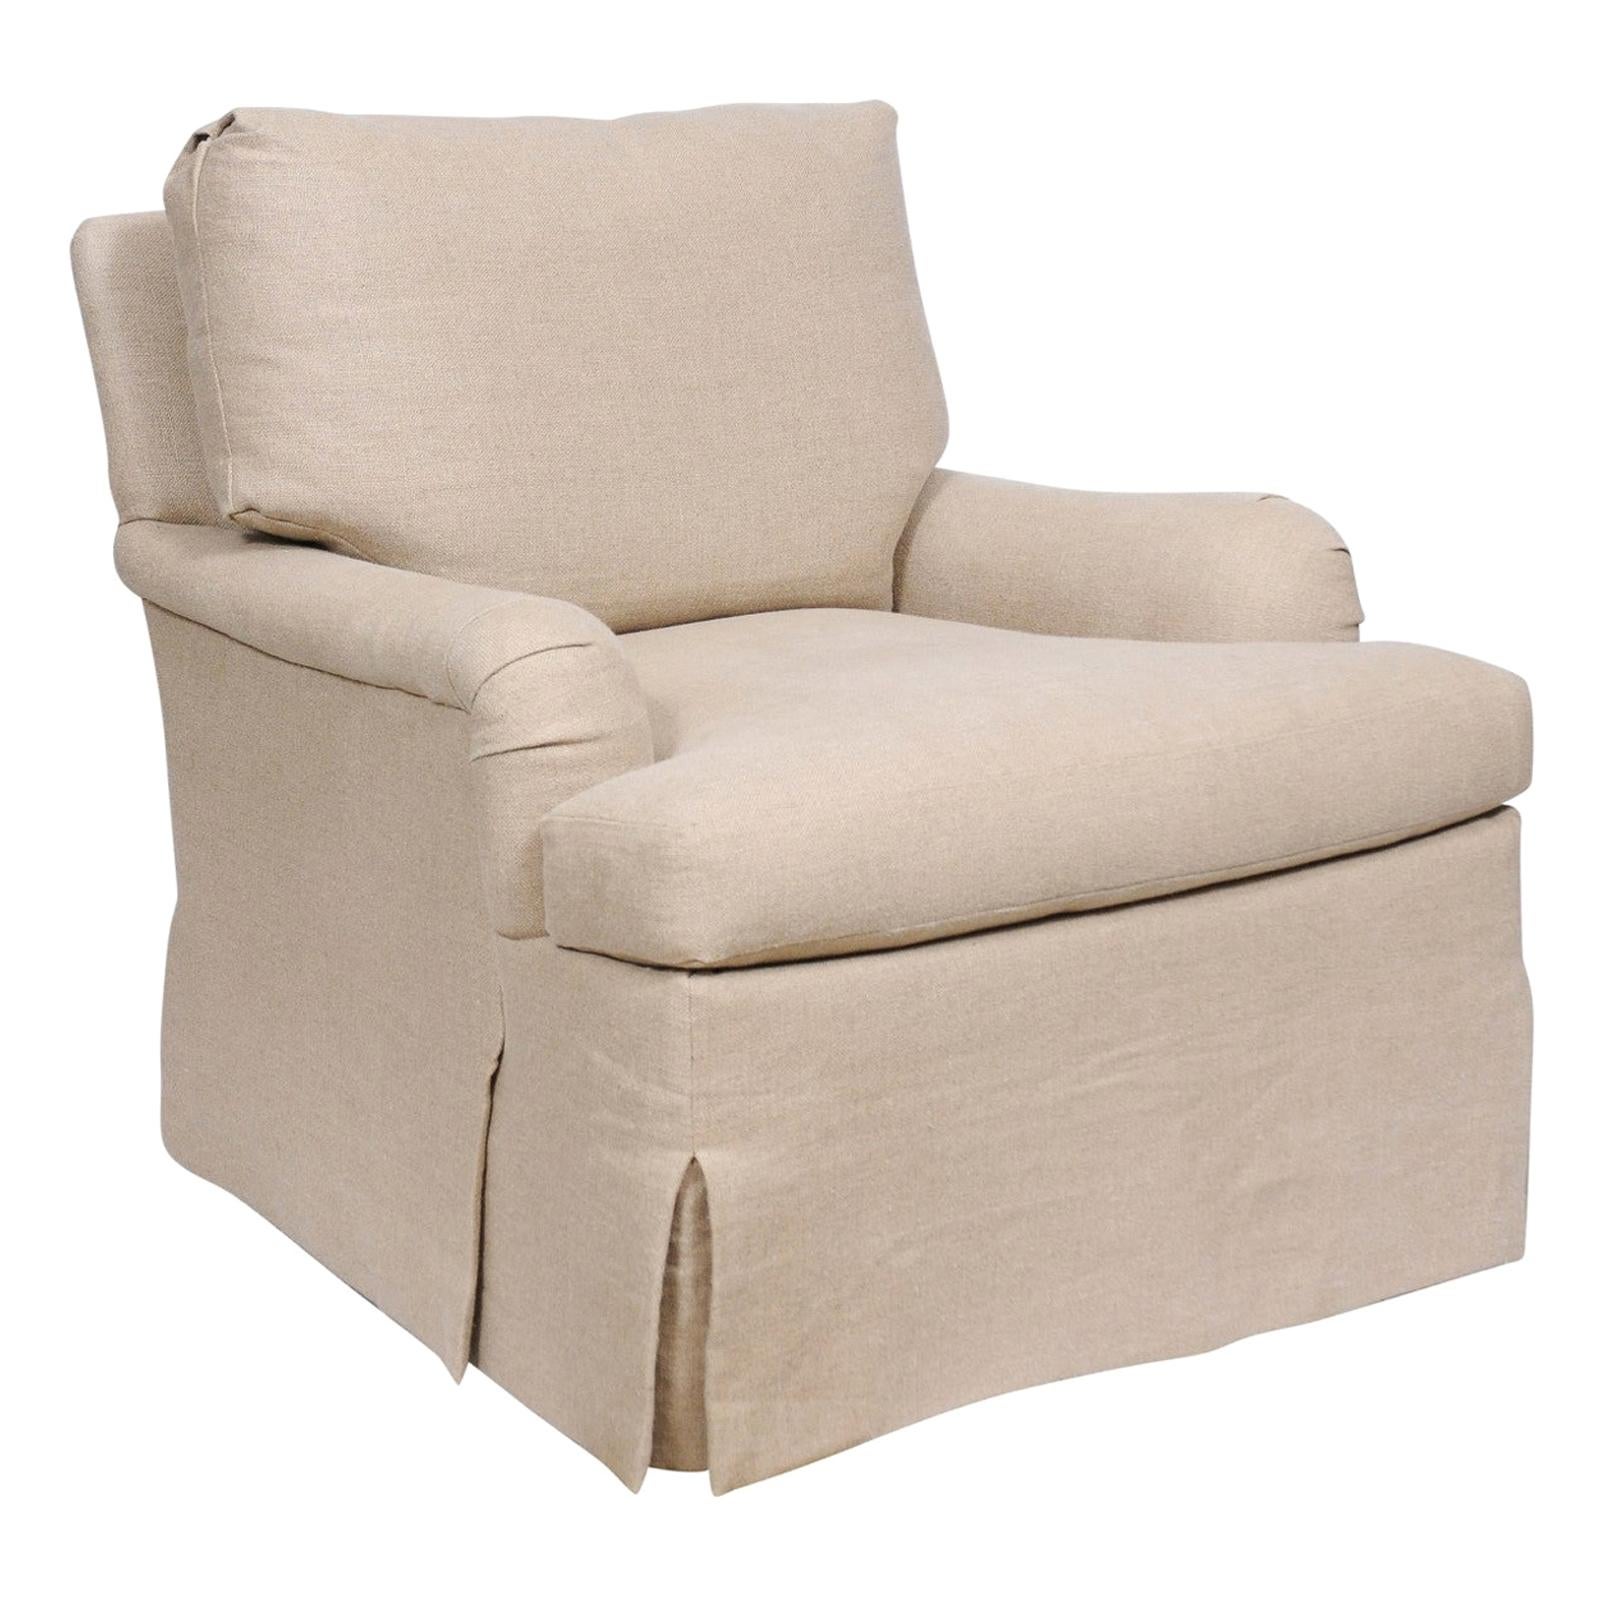 Weston Skirted Swivel Chair, by Hickory Chair